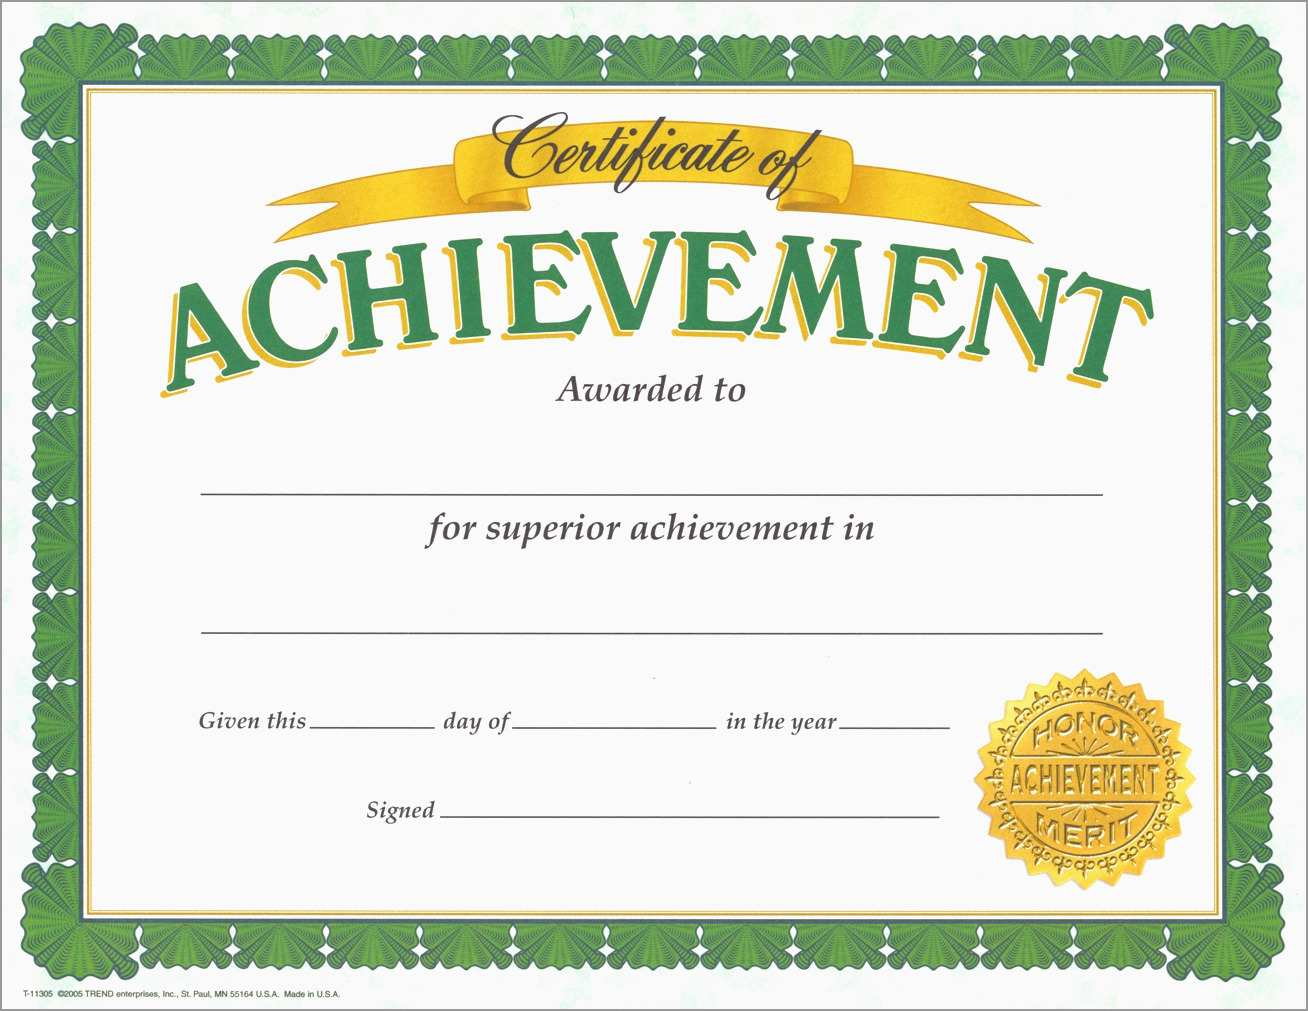 Free Printable Soccer Certificate Templates Of Achievement With Certificate Of Accomplishment Template Free